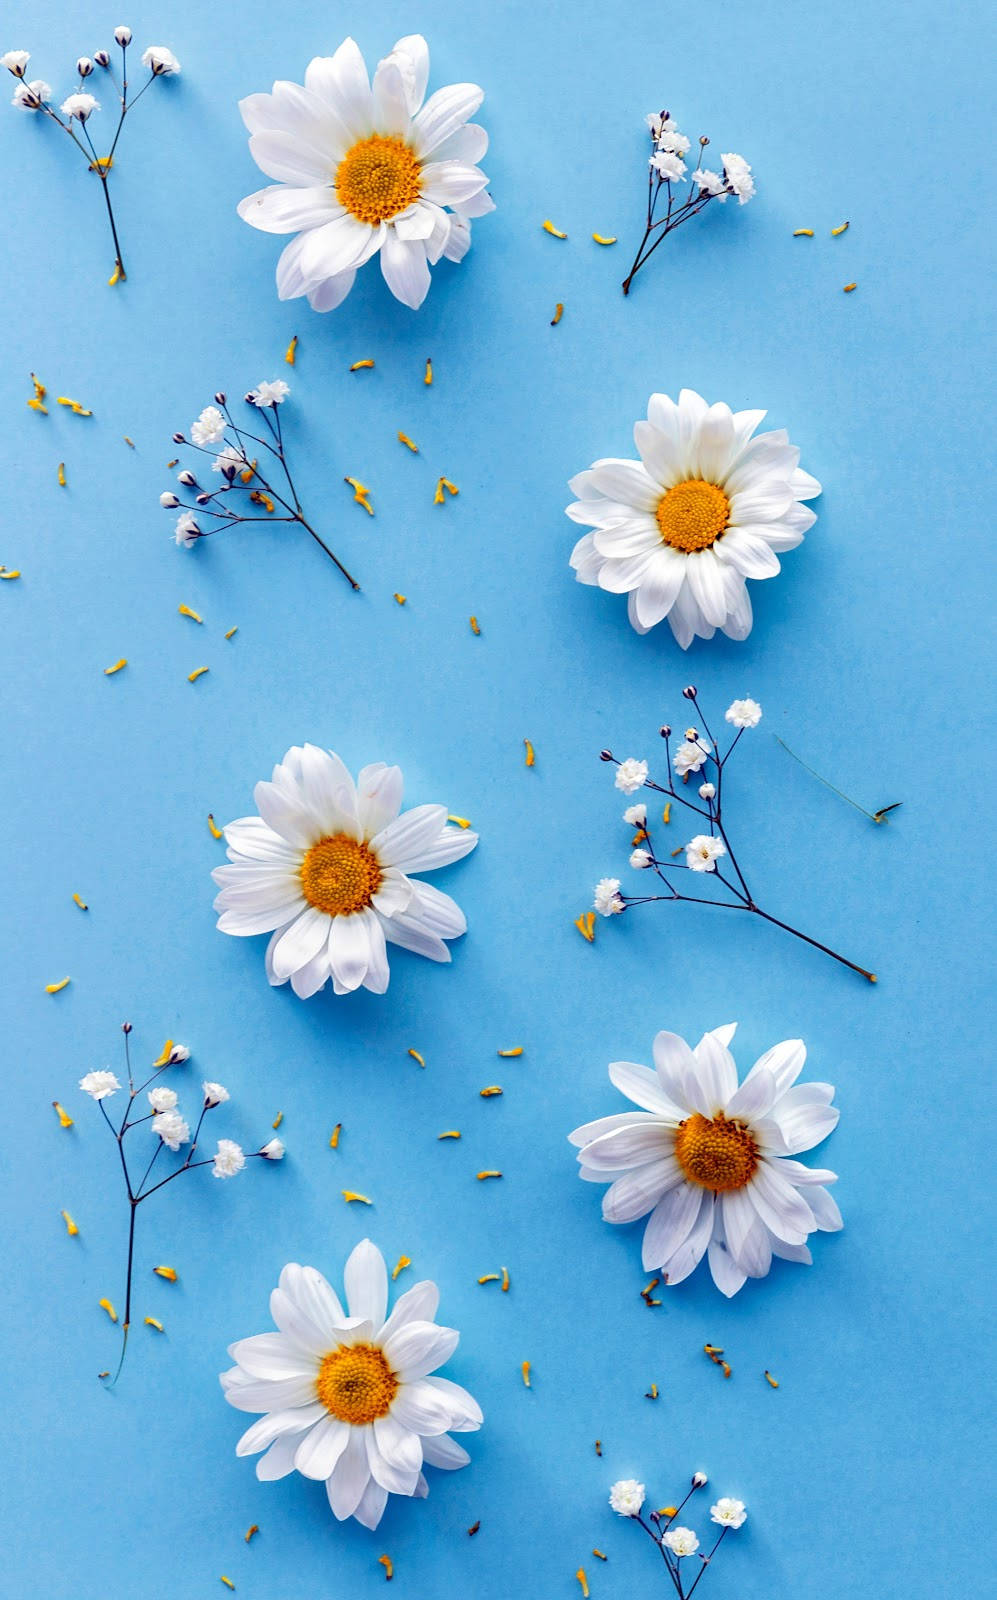 Tranquil Daisy Aesthetic on a Blue Table Wallpaper